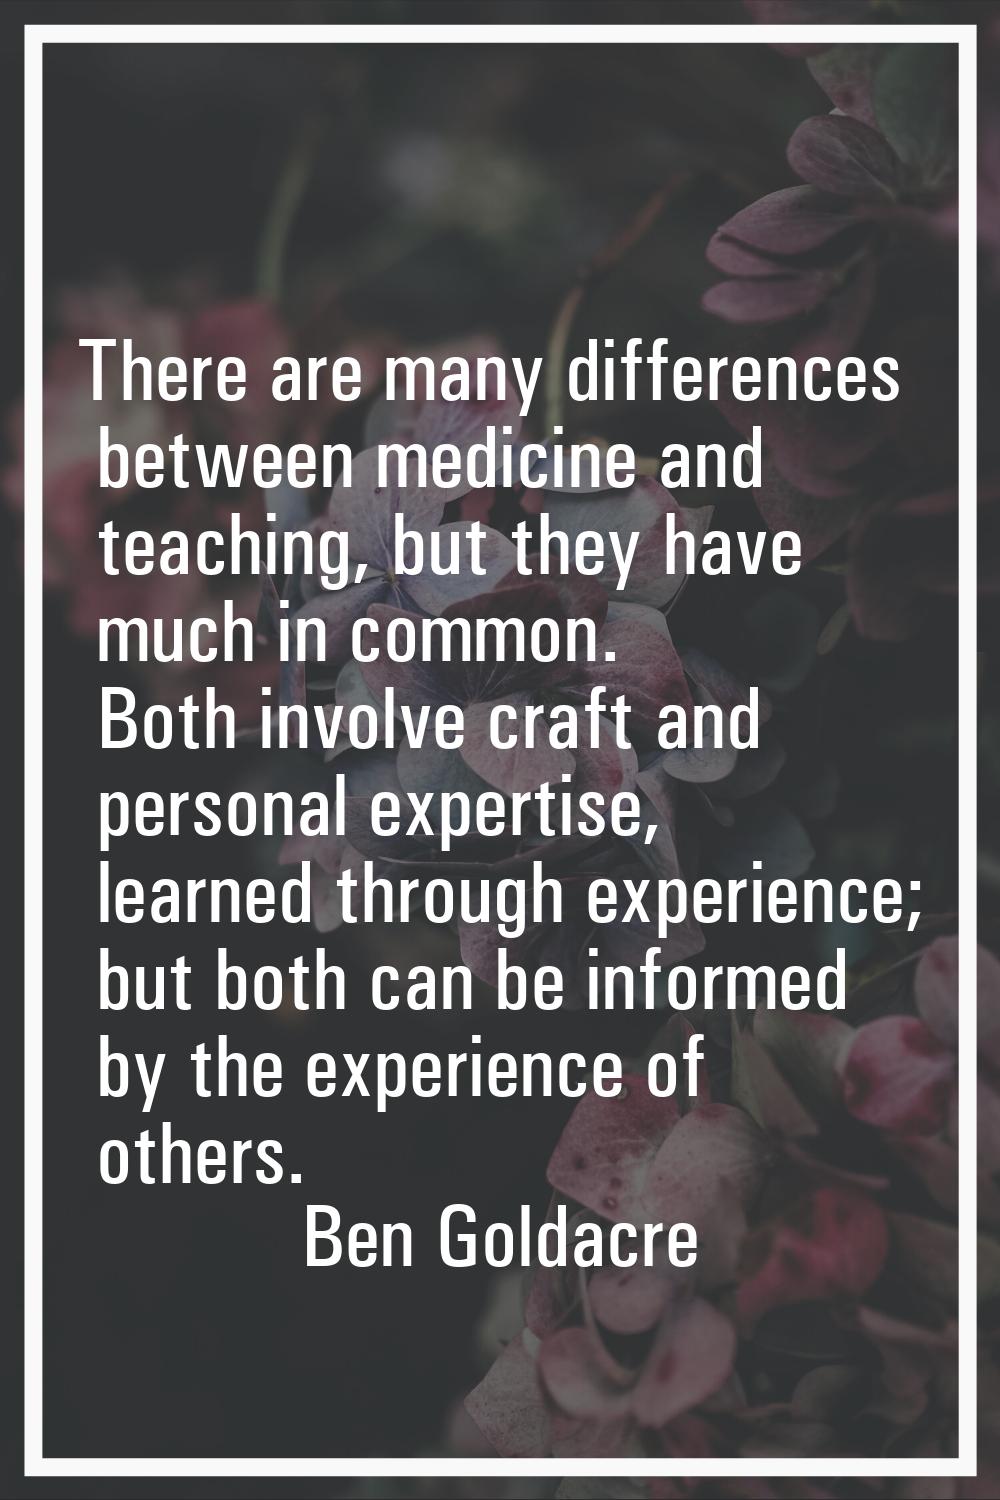 There are many differences between medicine and teaching, but they have much in common. Both involv